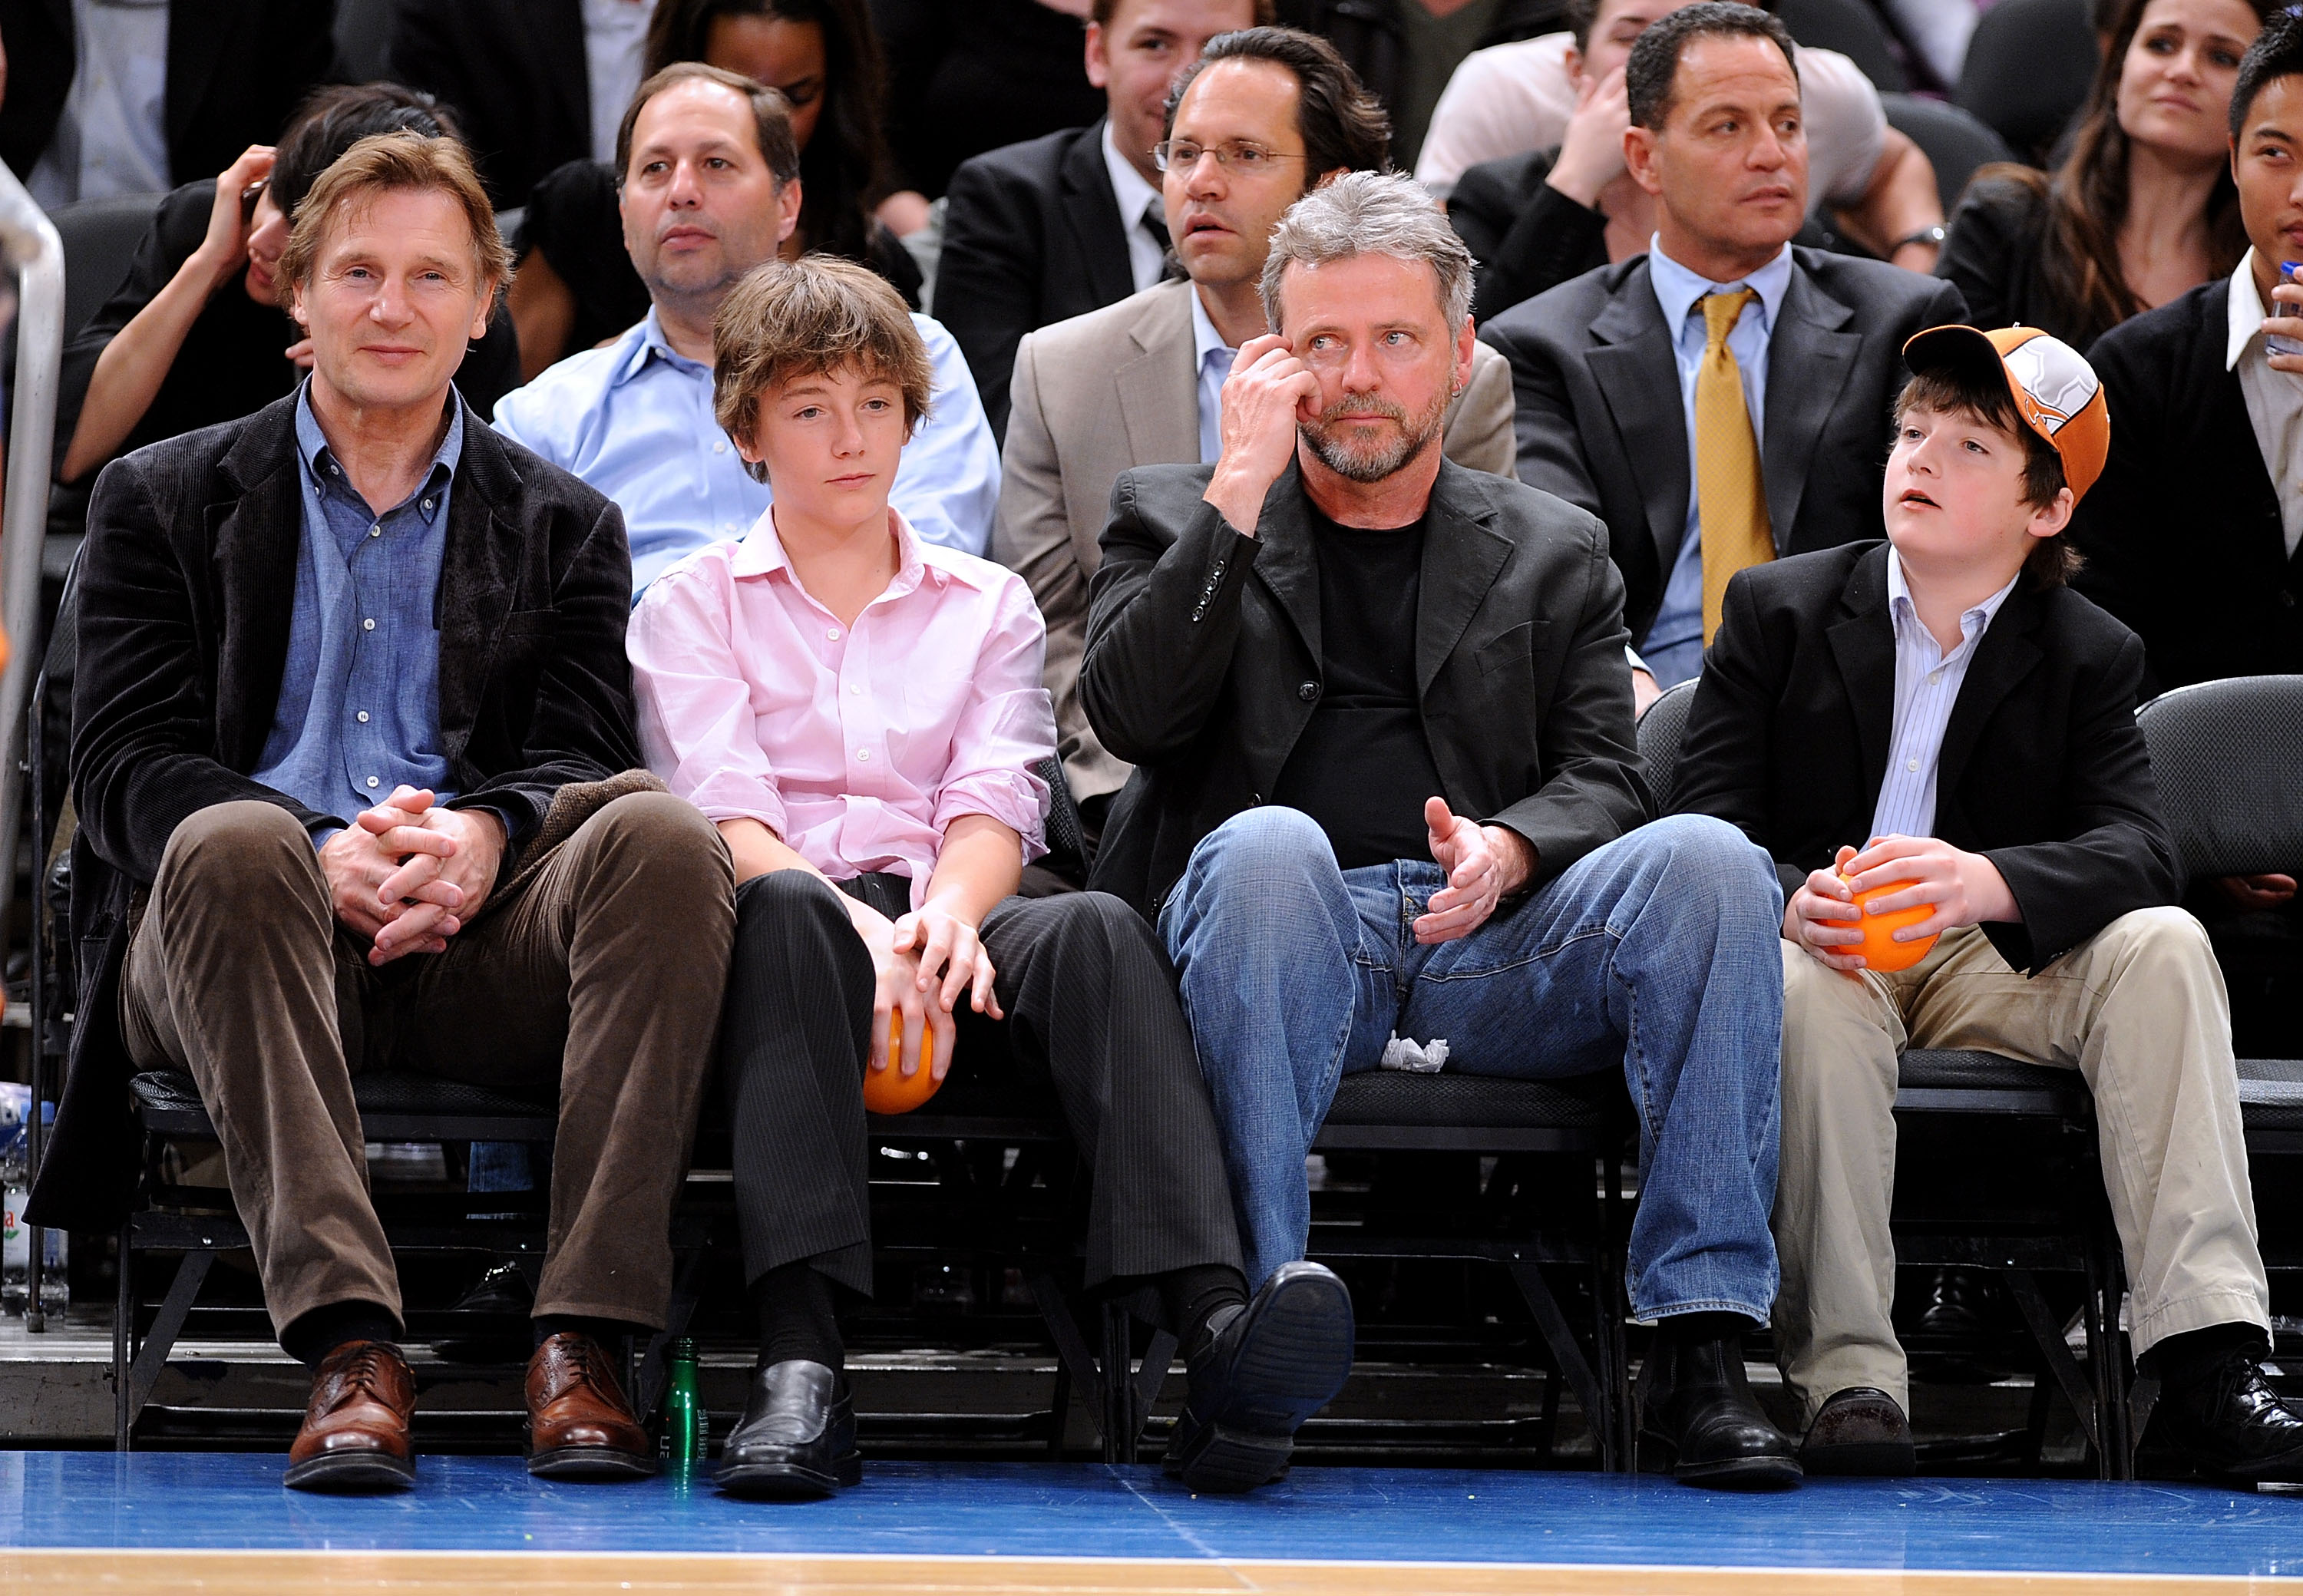 Liam Neeson, Michael Neeson, Aidan Quinn, and Daniel Neeson on April 15, 2009 in New York City | Source: Getty Images